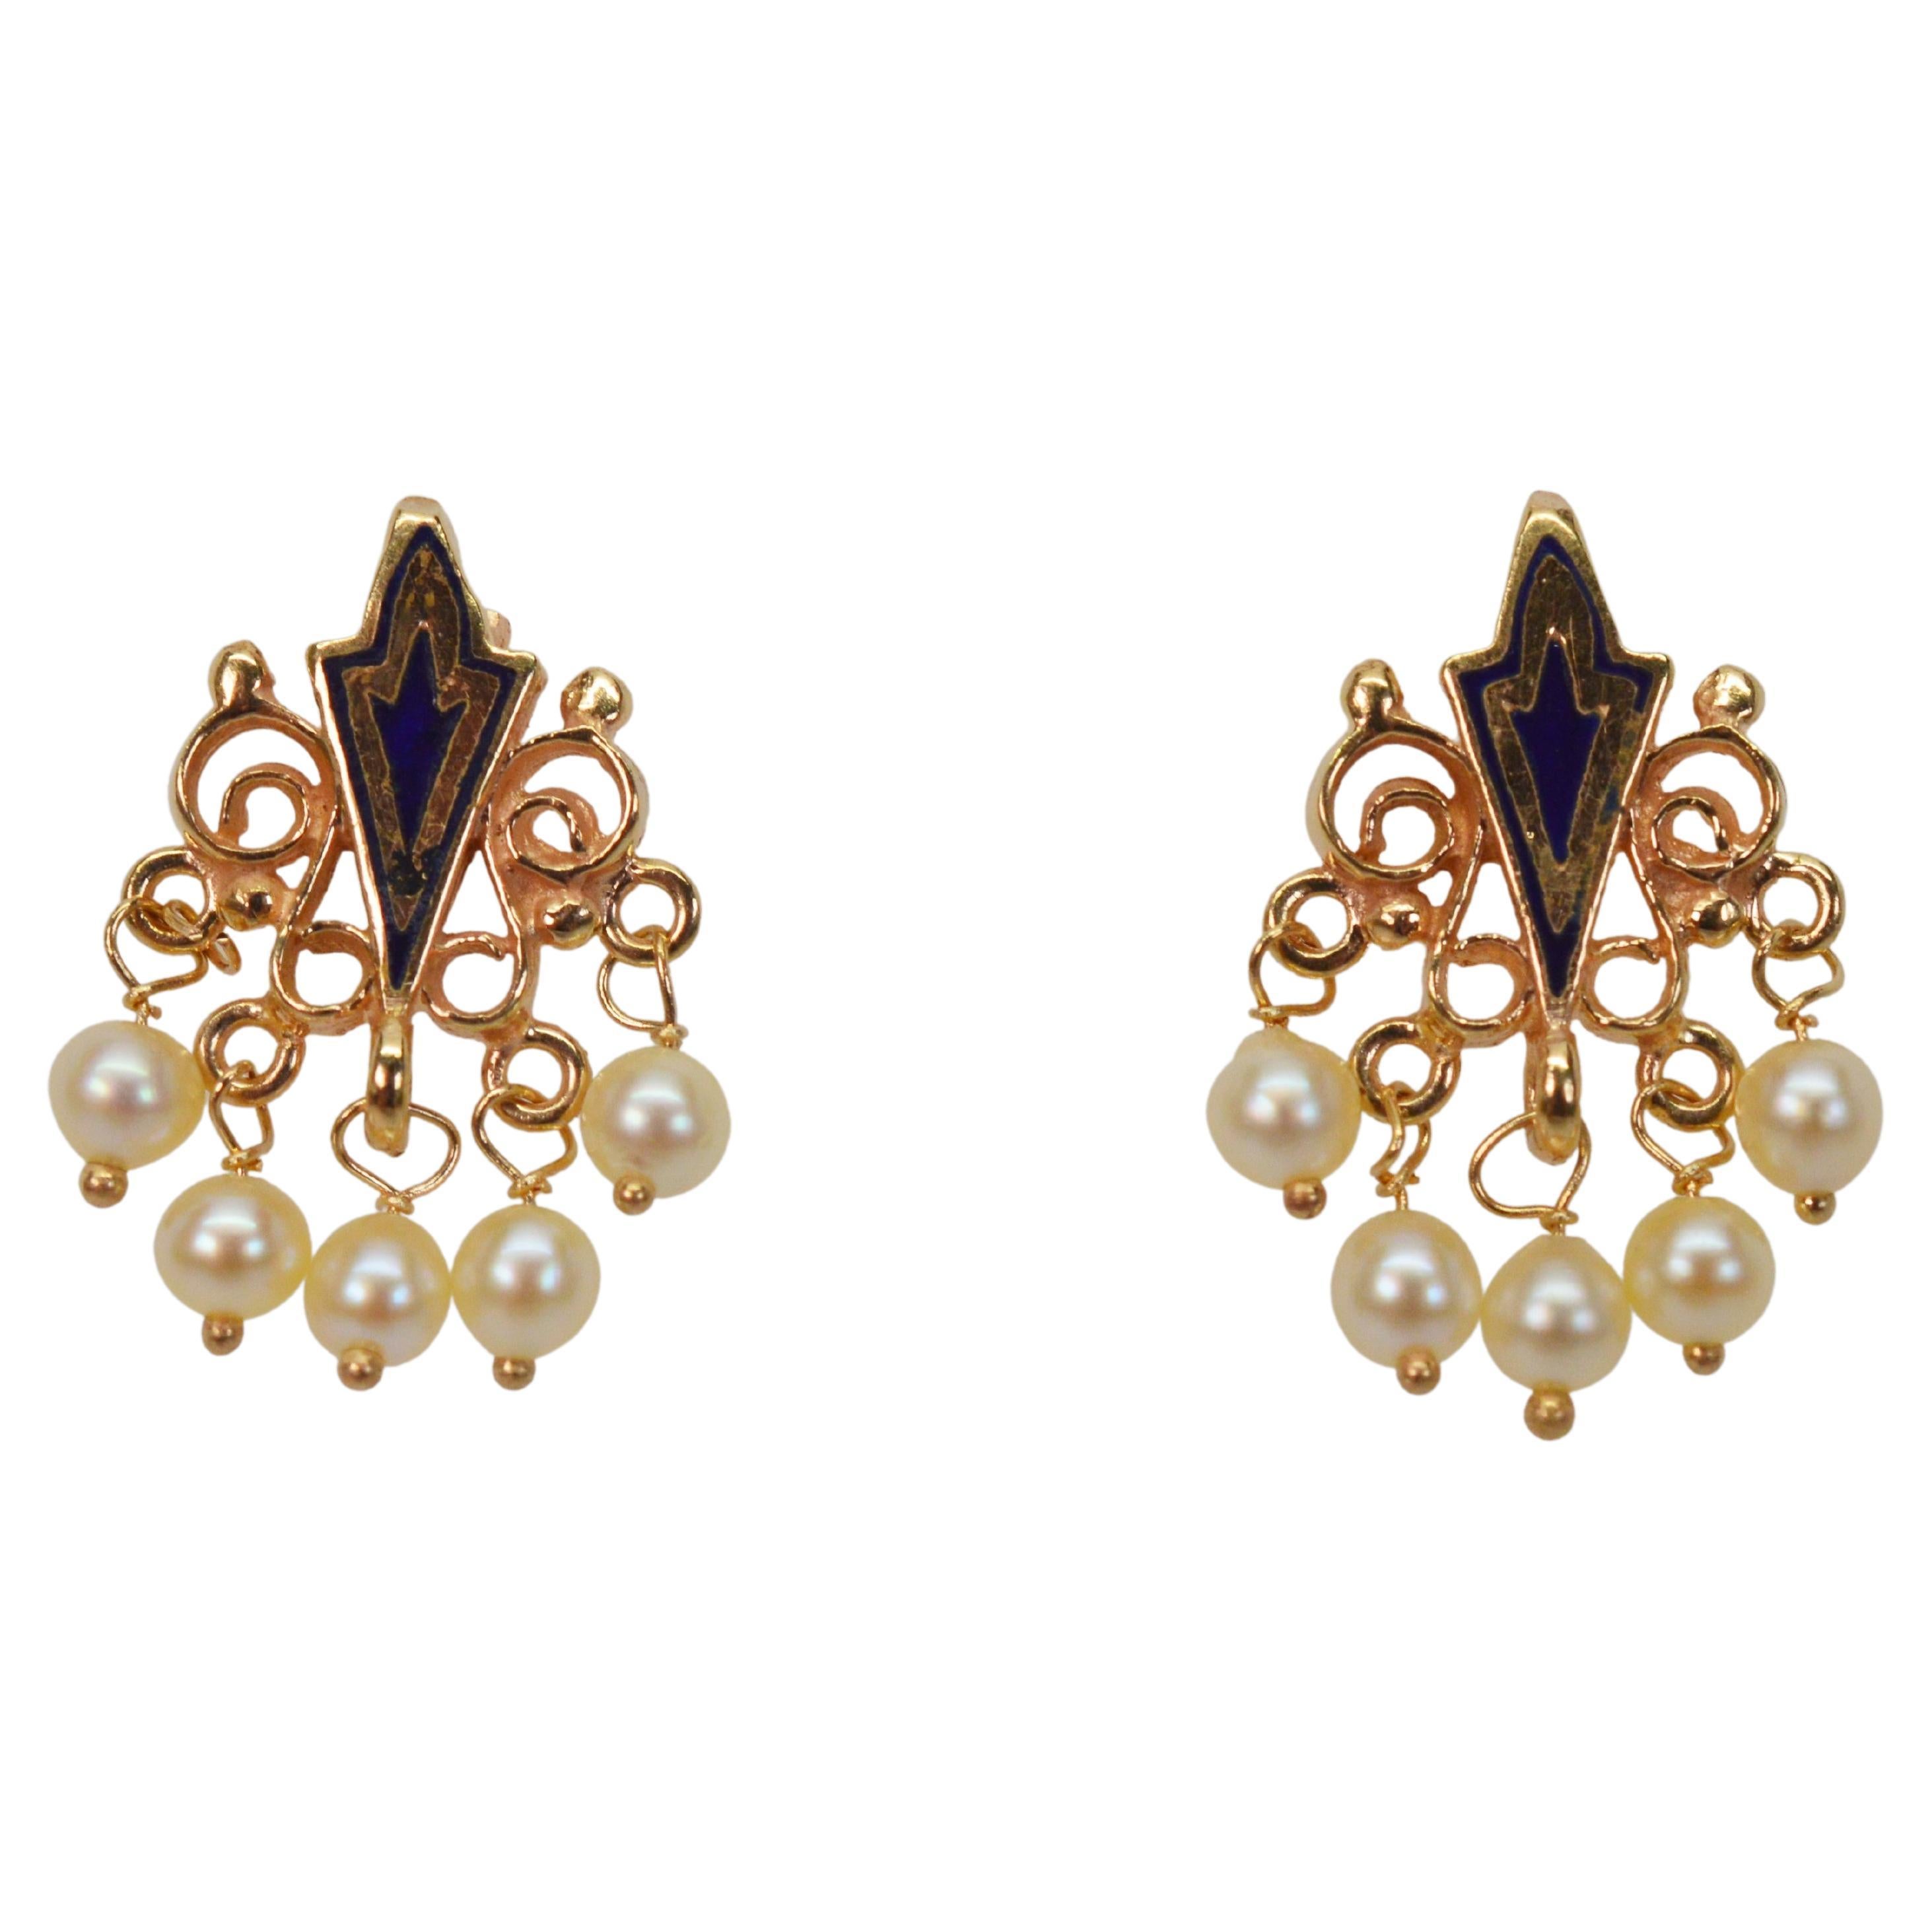 Antique Style 10 Karat Yellow Gold Pearl Drop Earrings with Black Enamel Accents For Sale